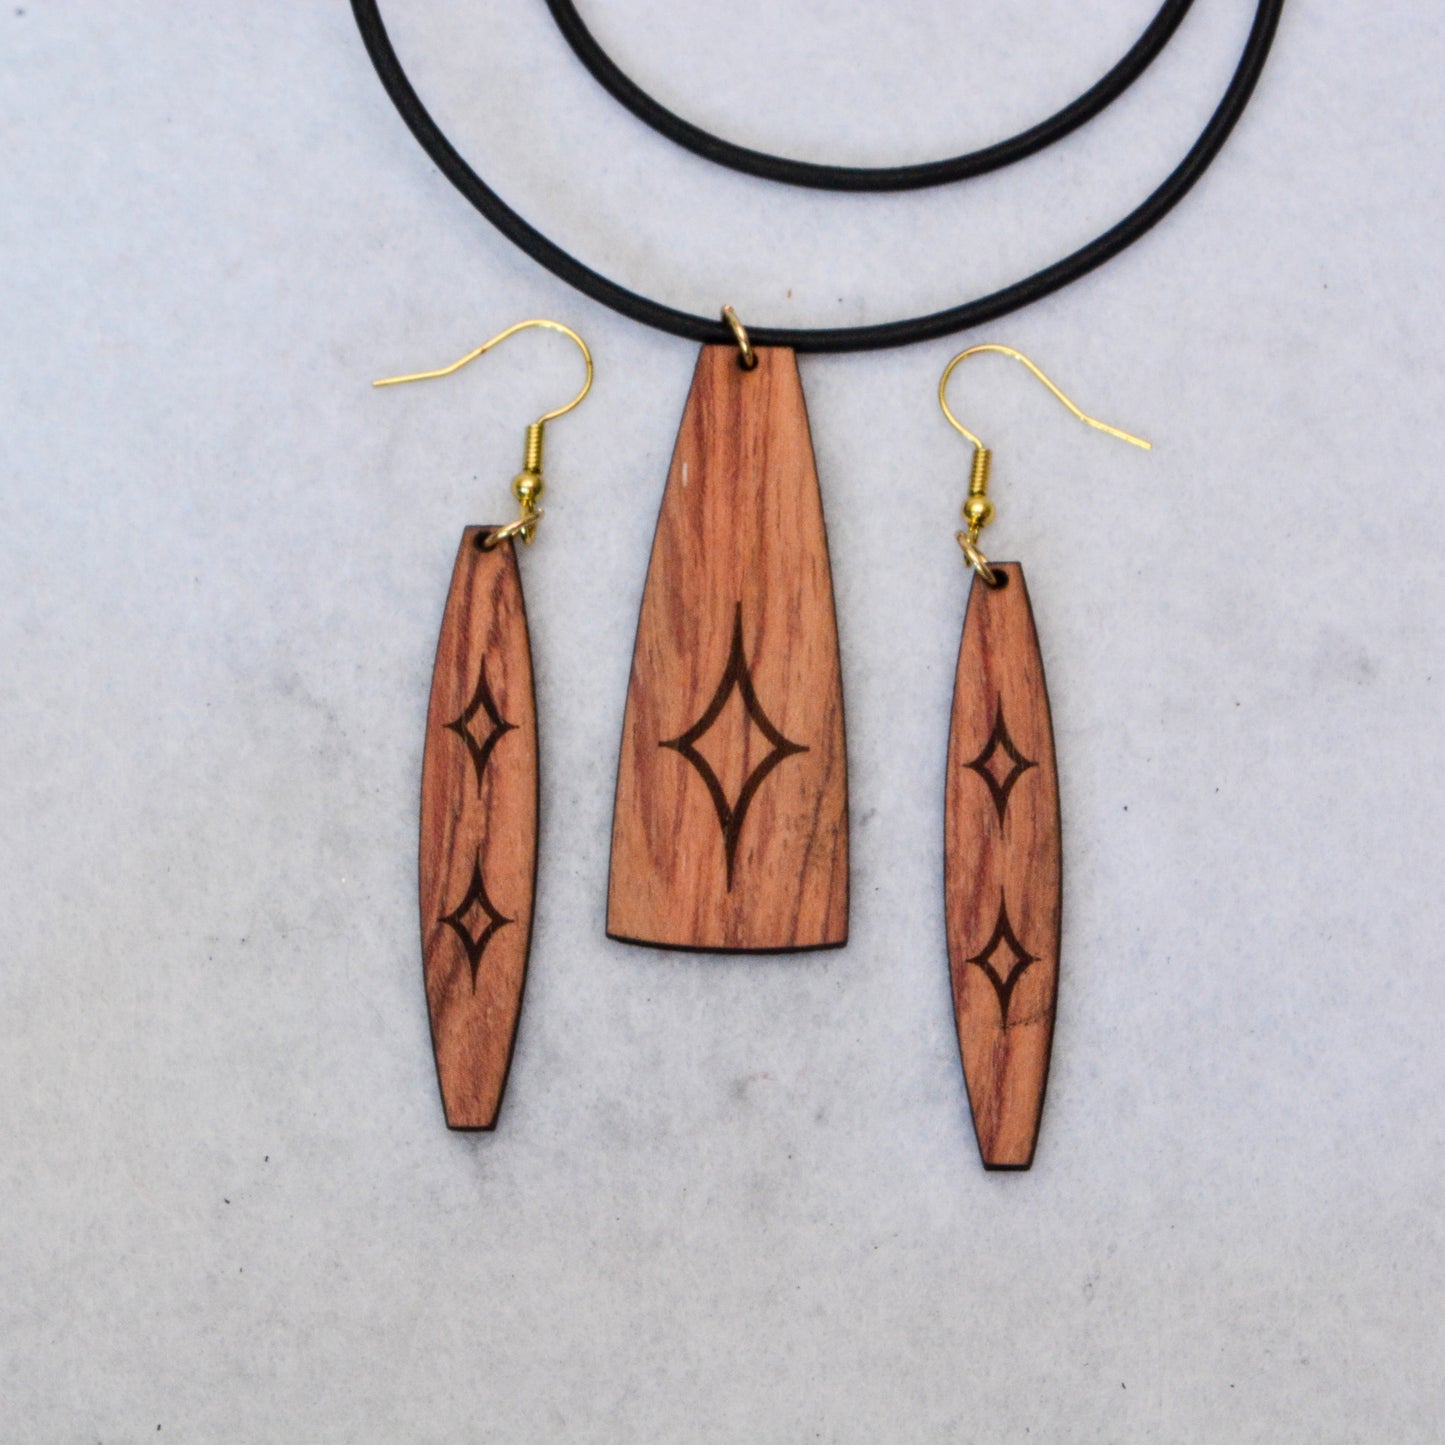 Ovaloid Star Design MCM-Inspired Wood Jewelry Set